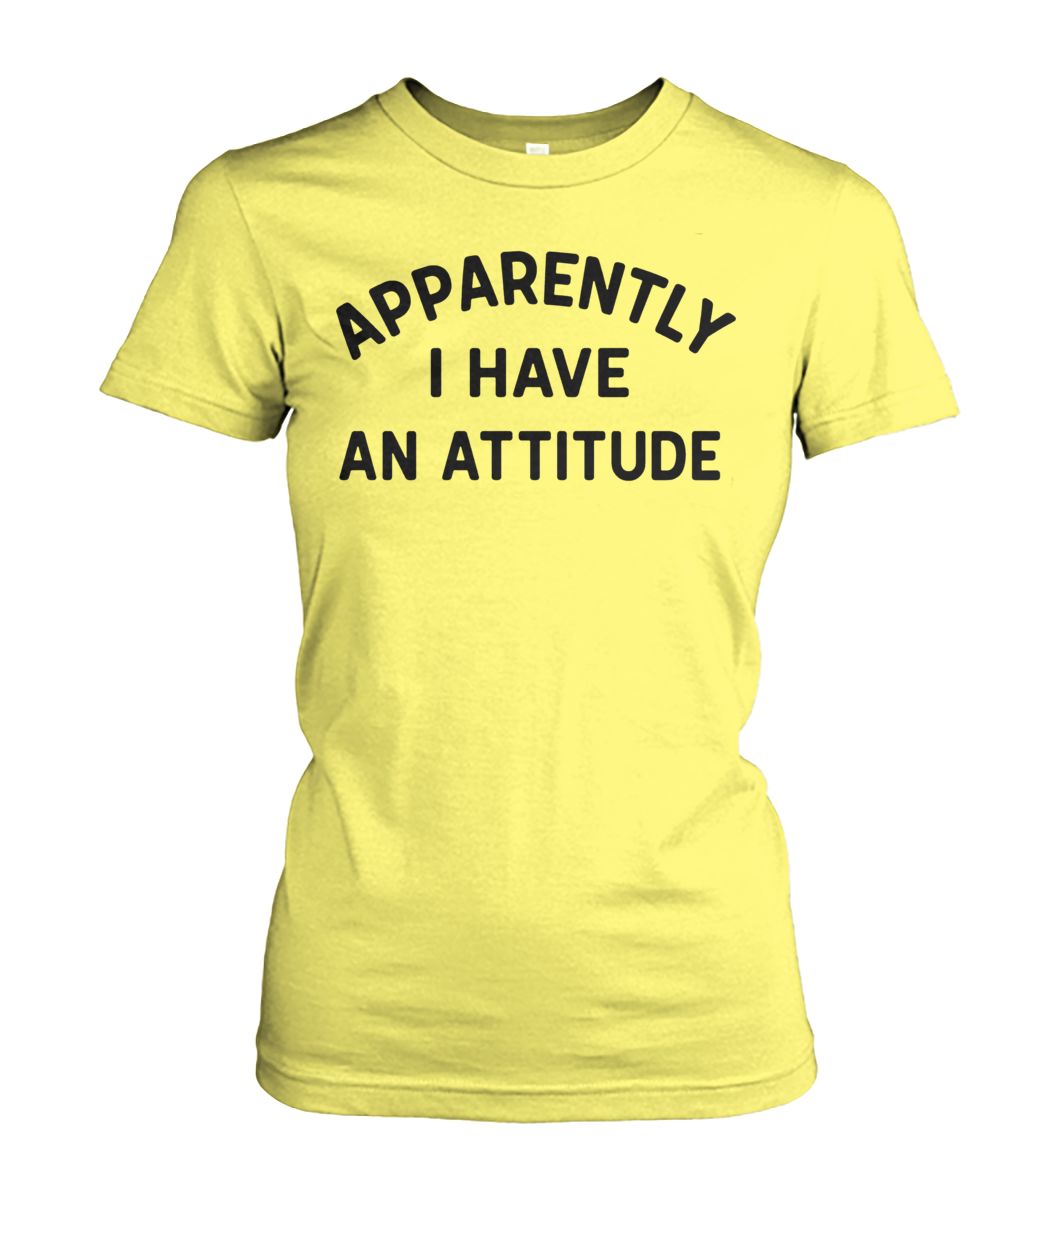 Apparently I have an attitude women's crew tee